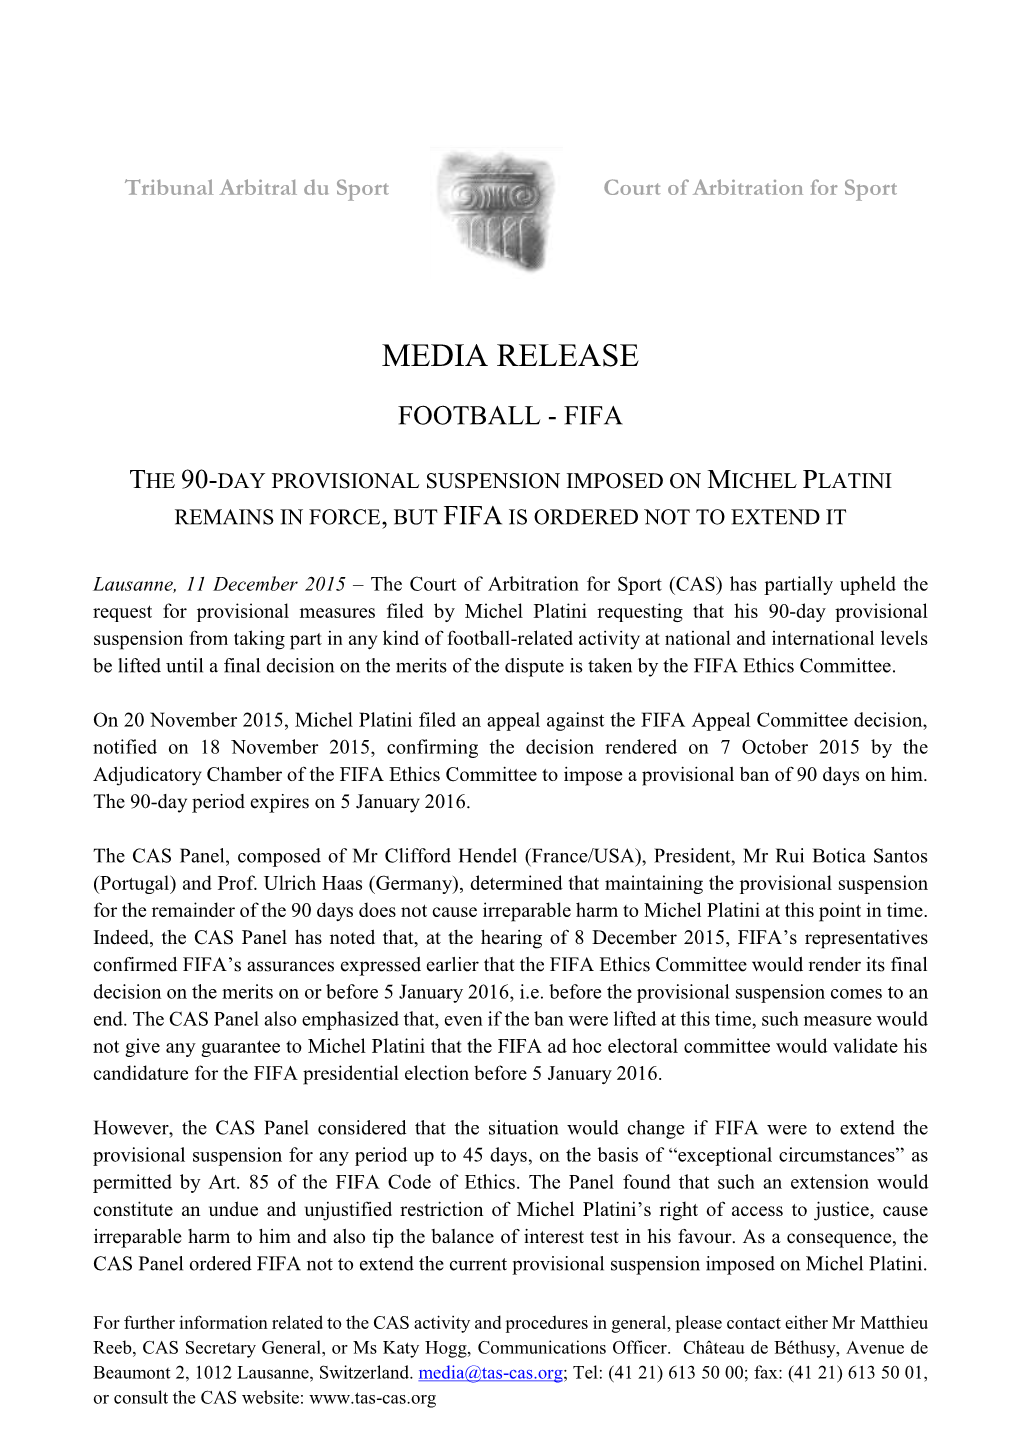 The 90-Day Provisional Suspension Imposed on Michel Platini Remains in Force, but Fifa Is Ordered Not to Extend It